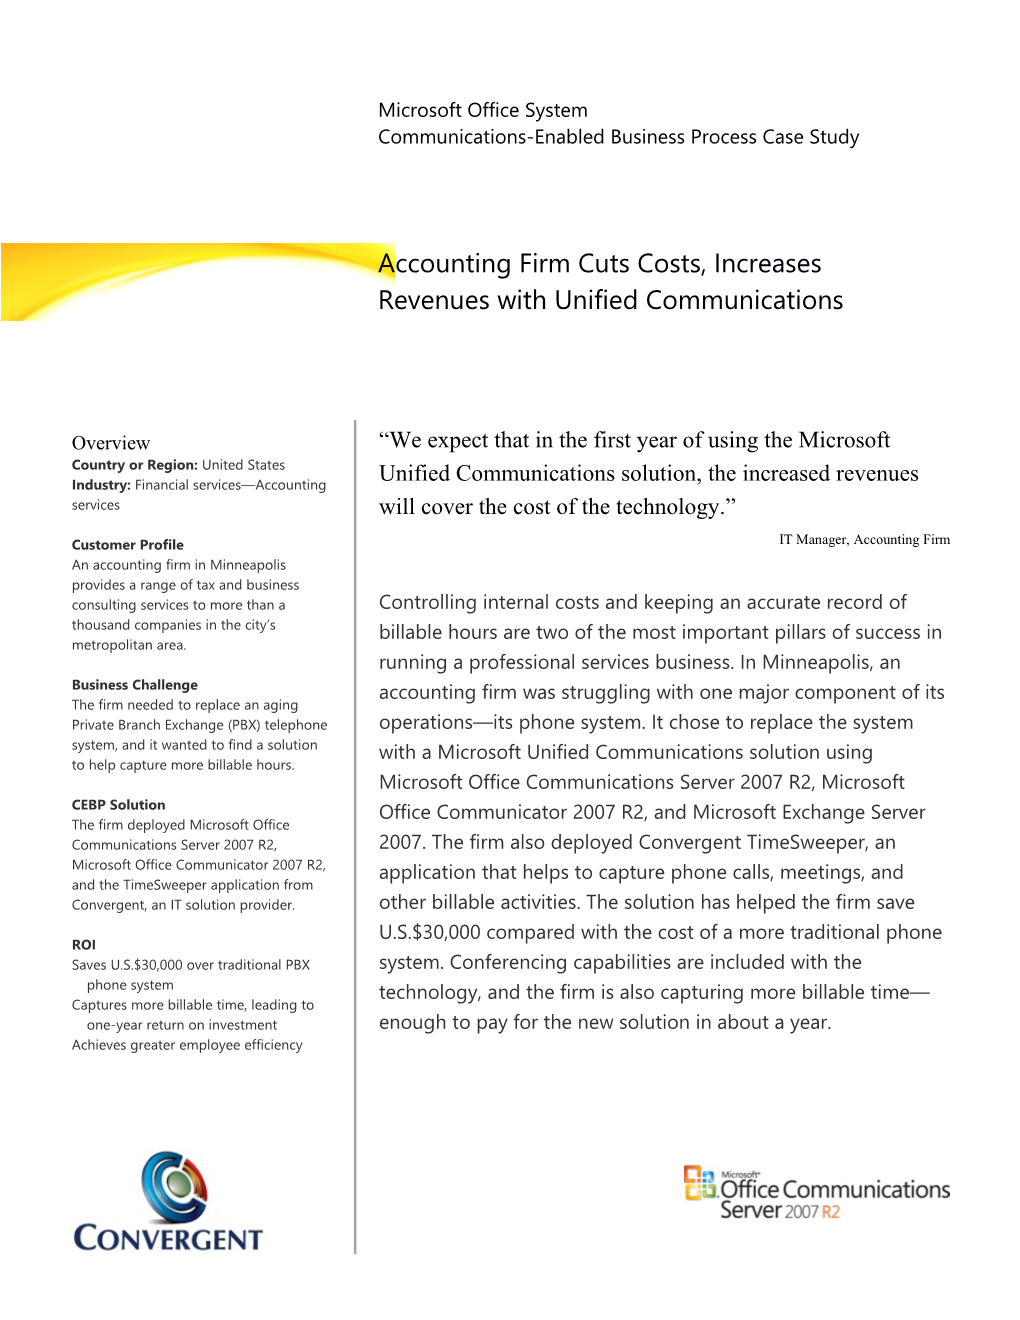 Accounting Firm Cuts Costs, Increases Revenues with Unified Communications